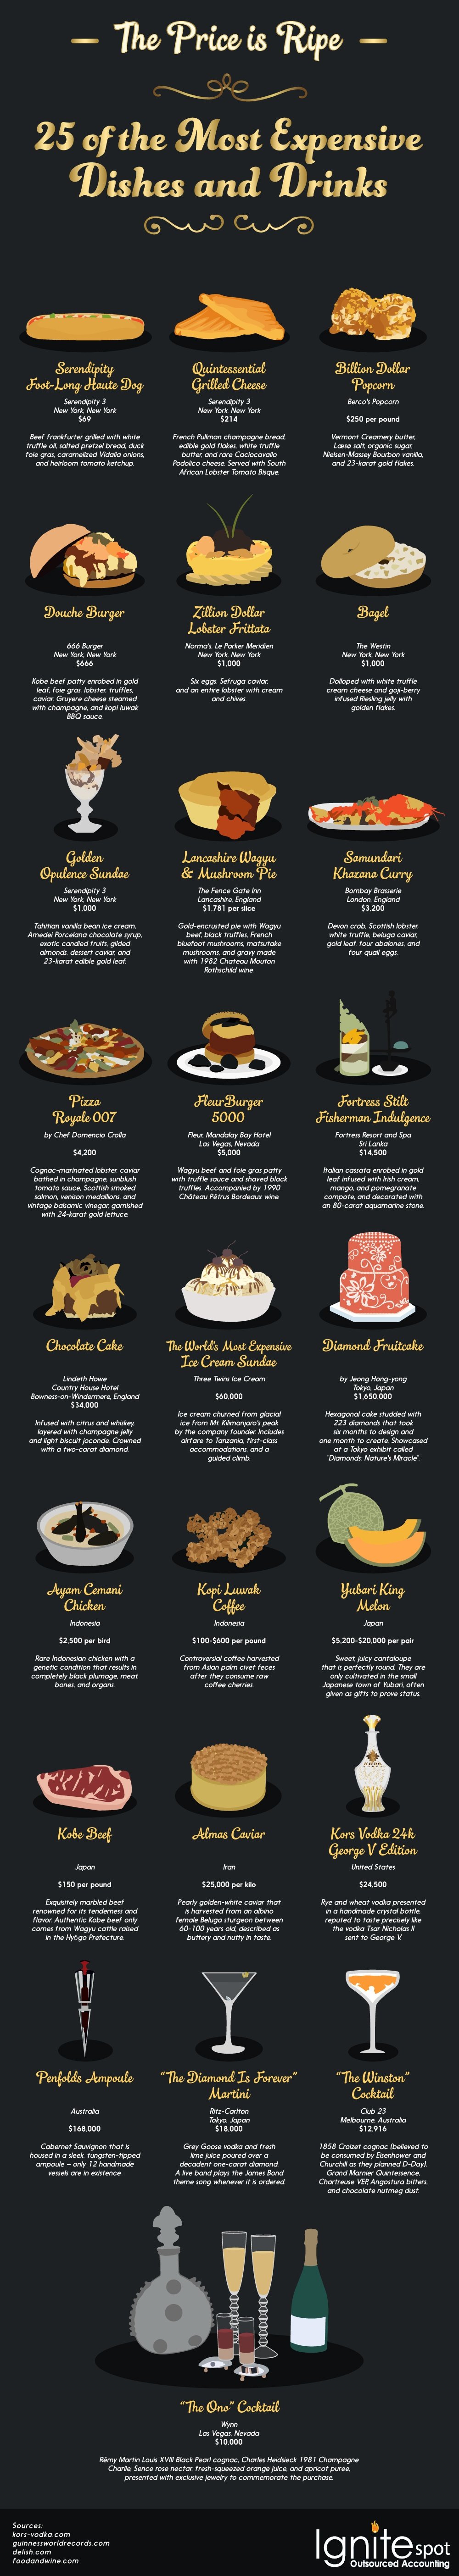 The Price is Ripe: 25 of the Most Expensive Dishes and Drinks - Ignitespot.com - Infographic